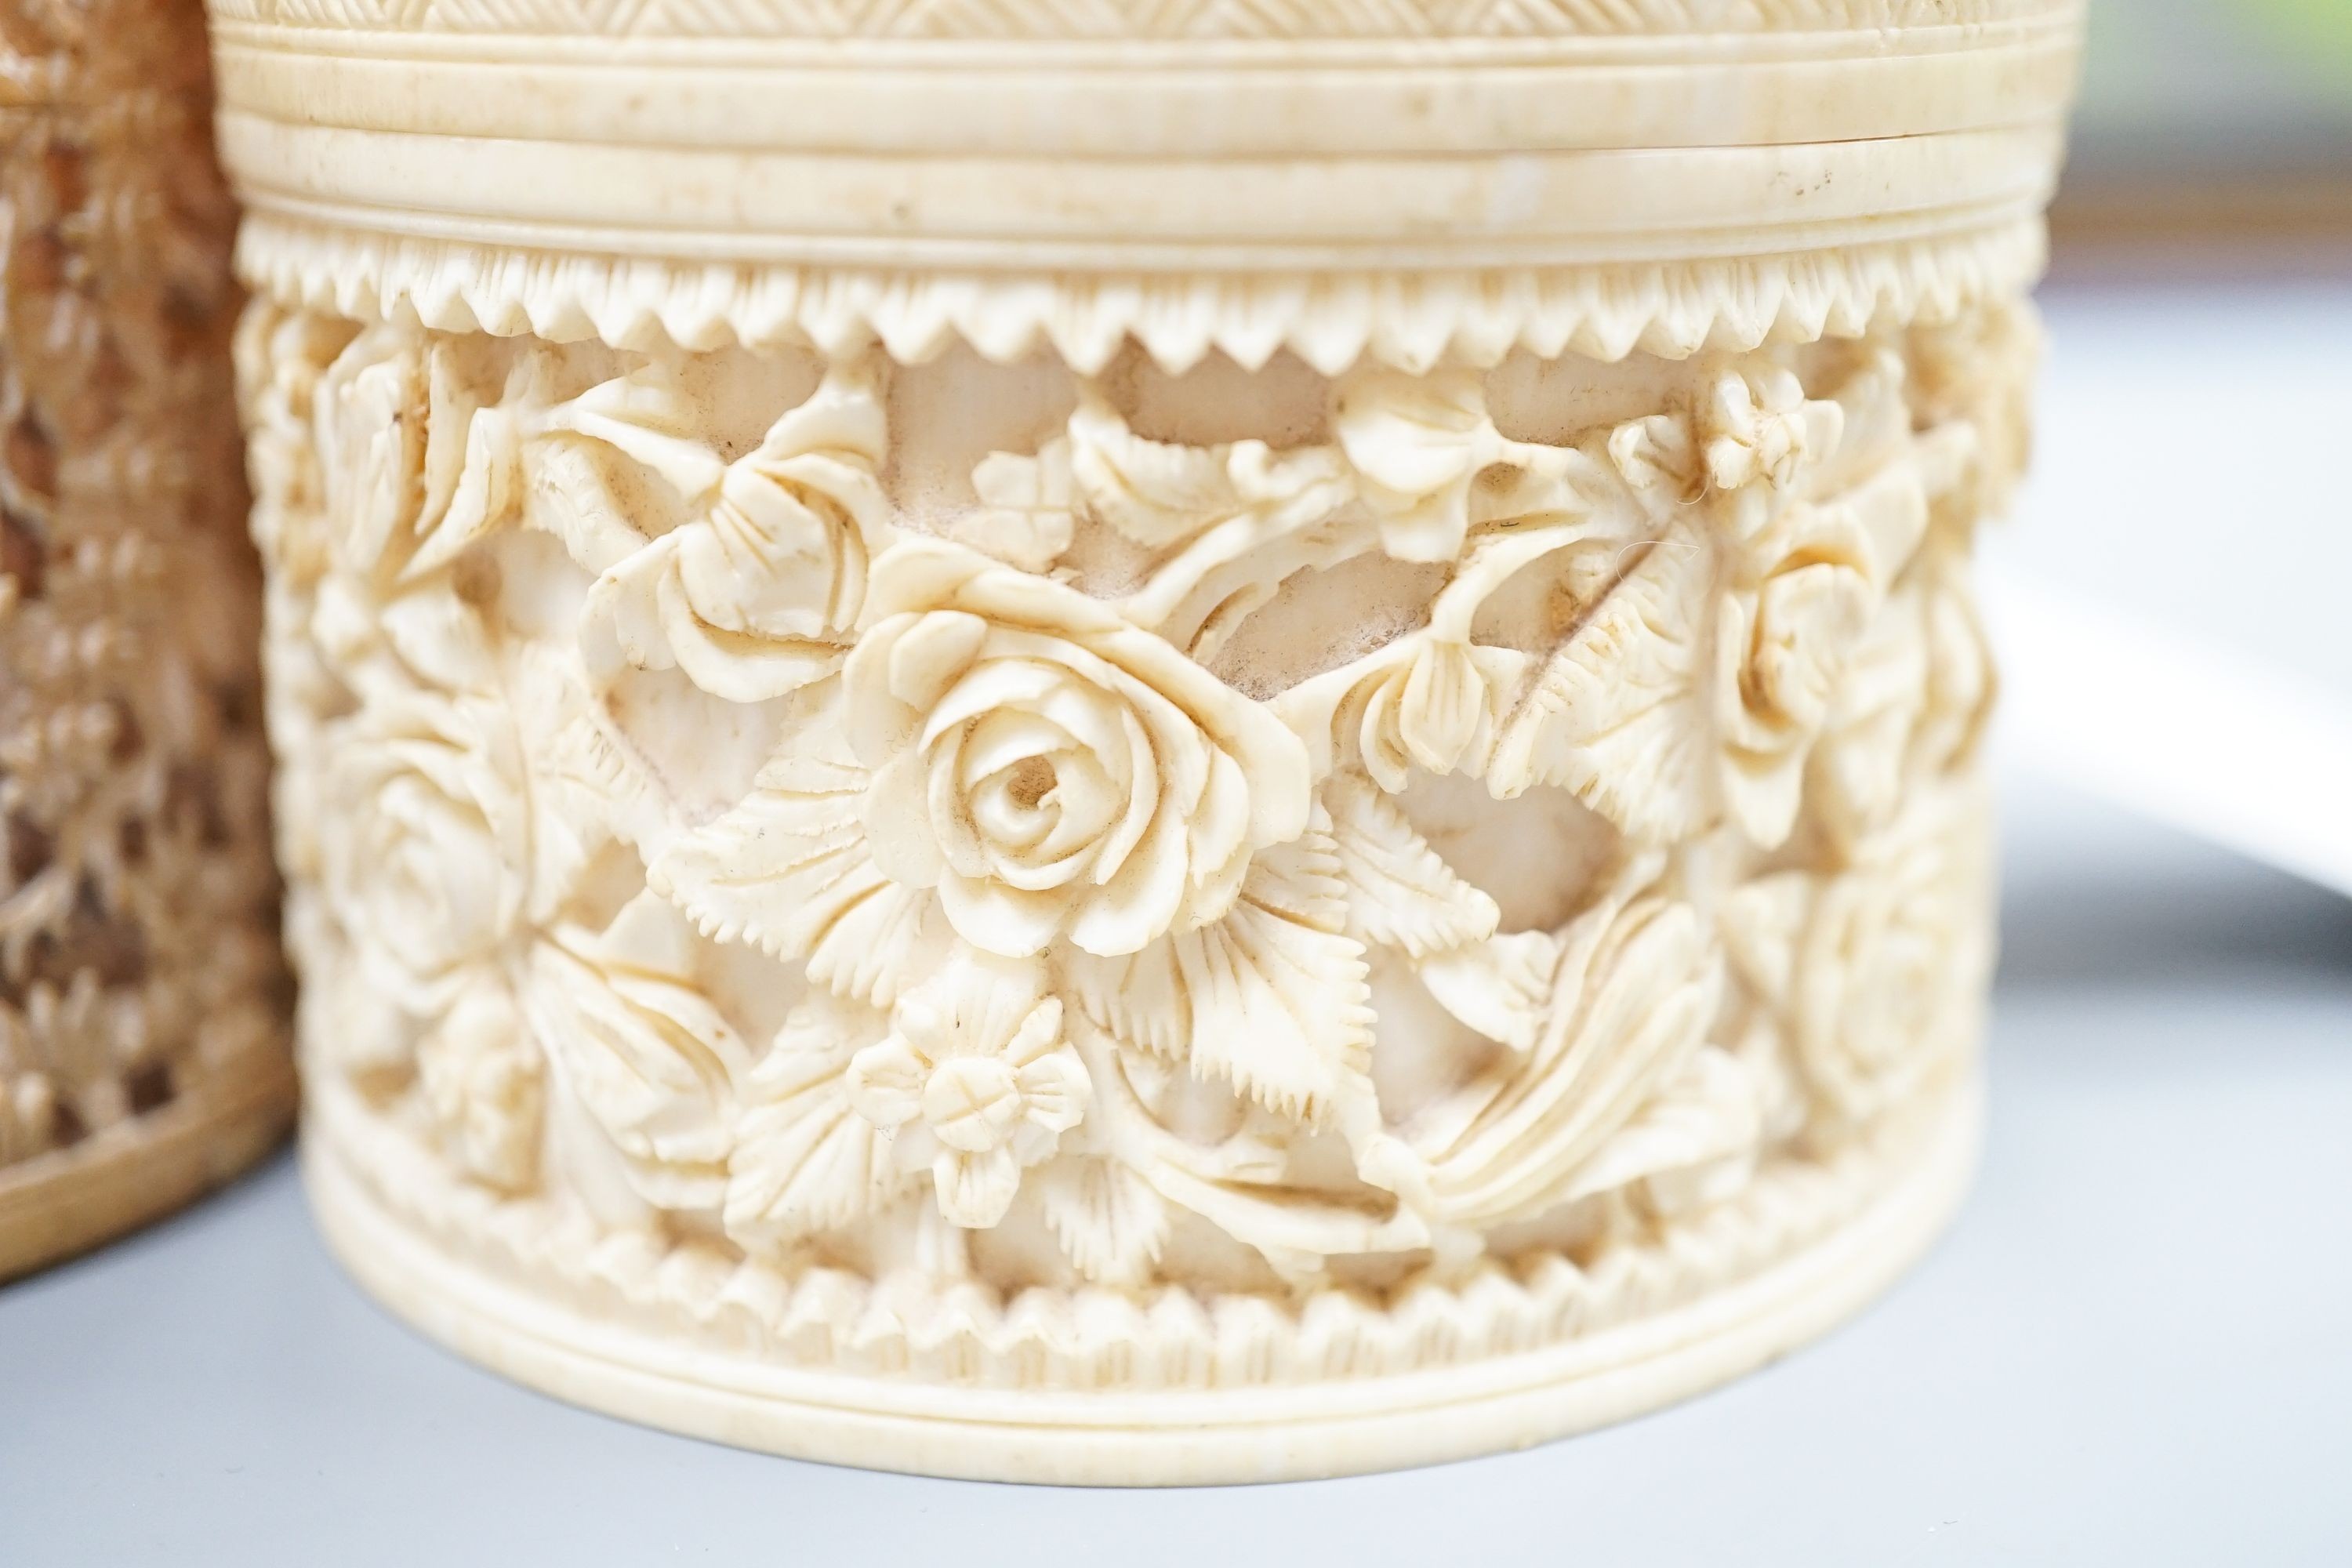 A pair of Chinese carved ivory pots and a Chinese ivory circular box and cover, 19th century